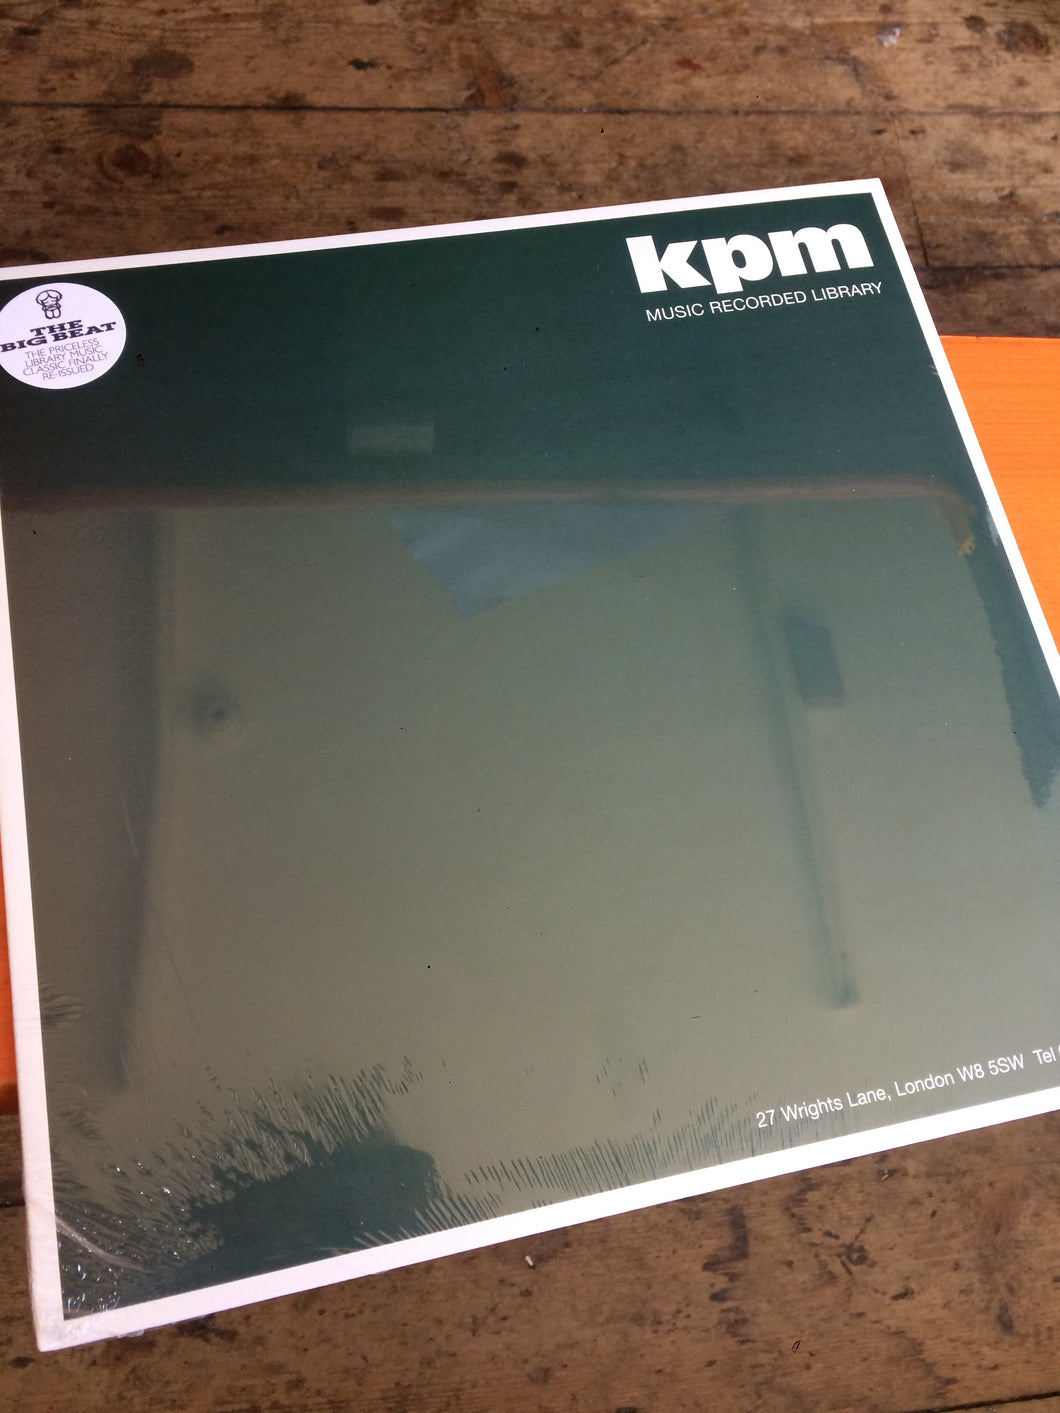 KPM Music Recorded Library - The Big Beat